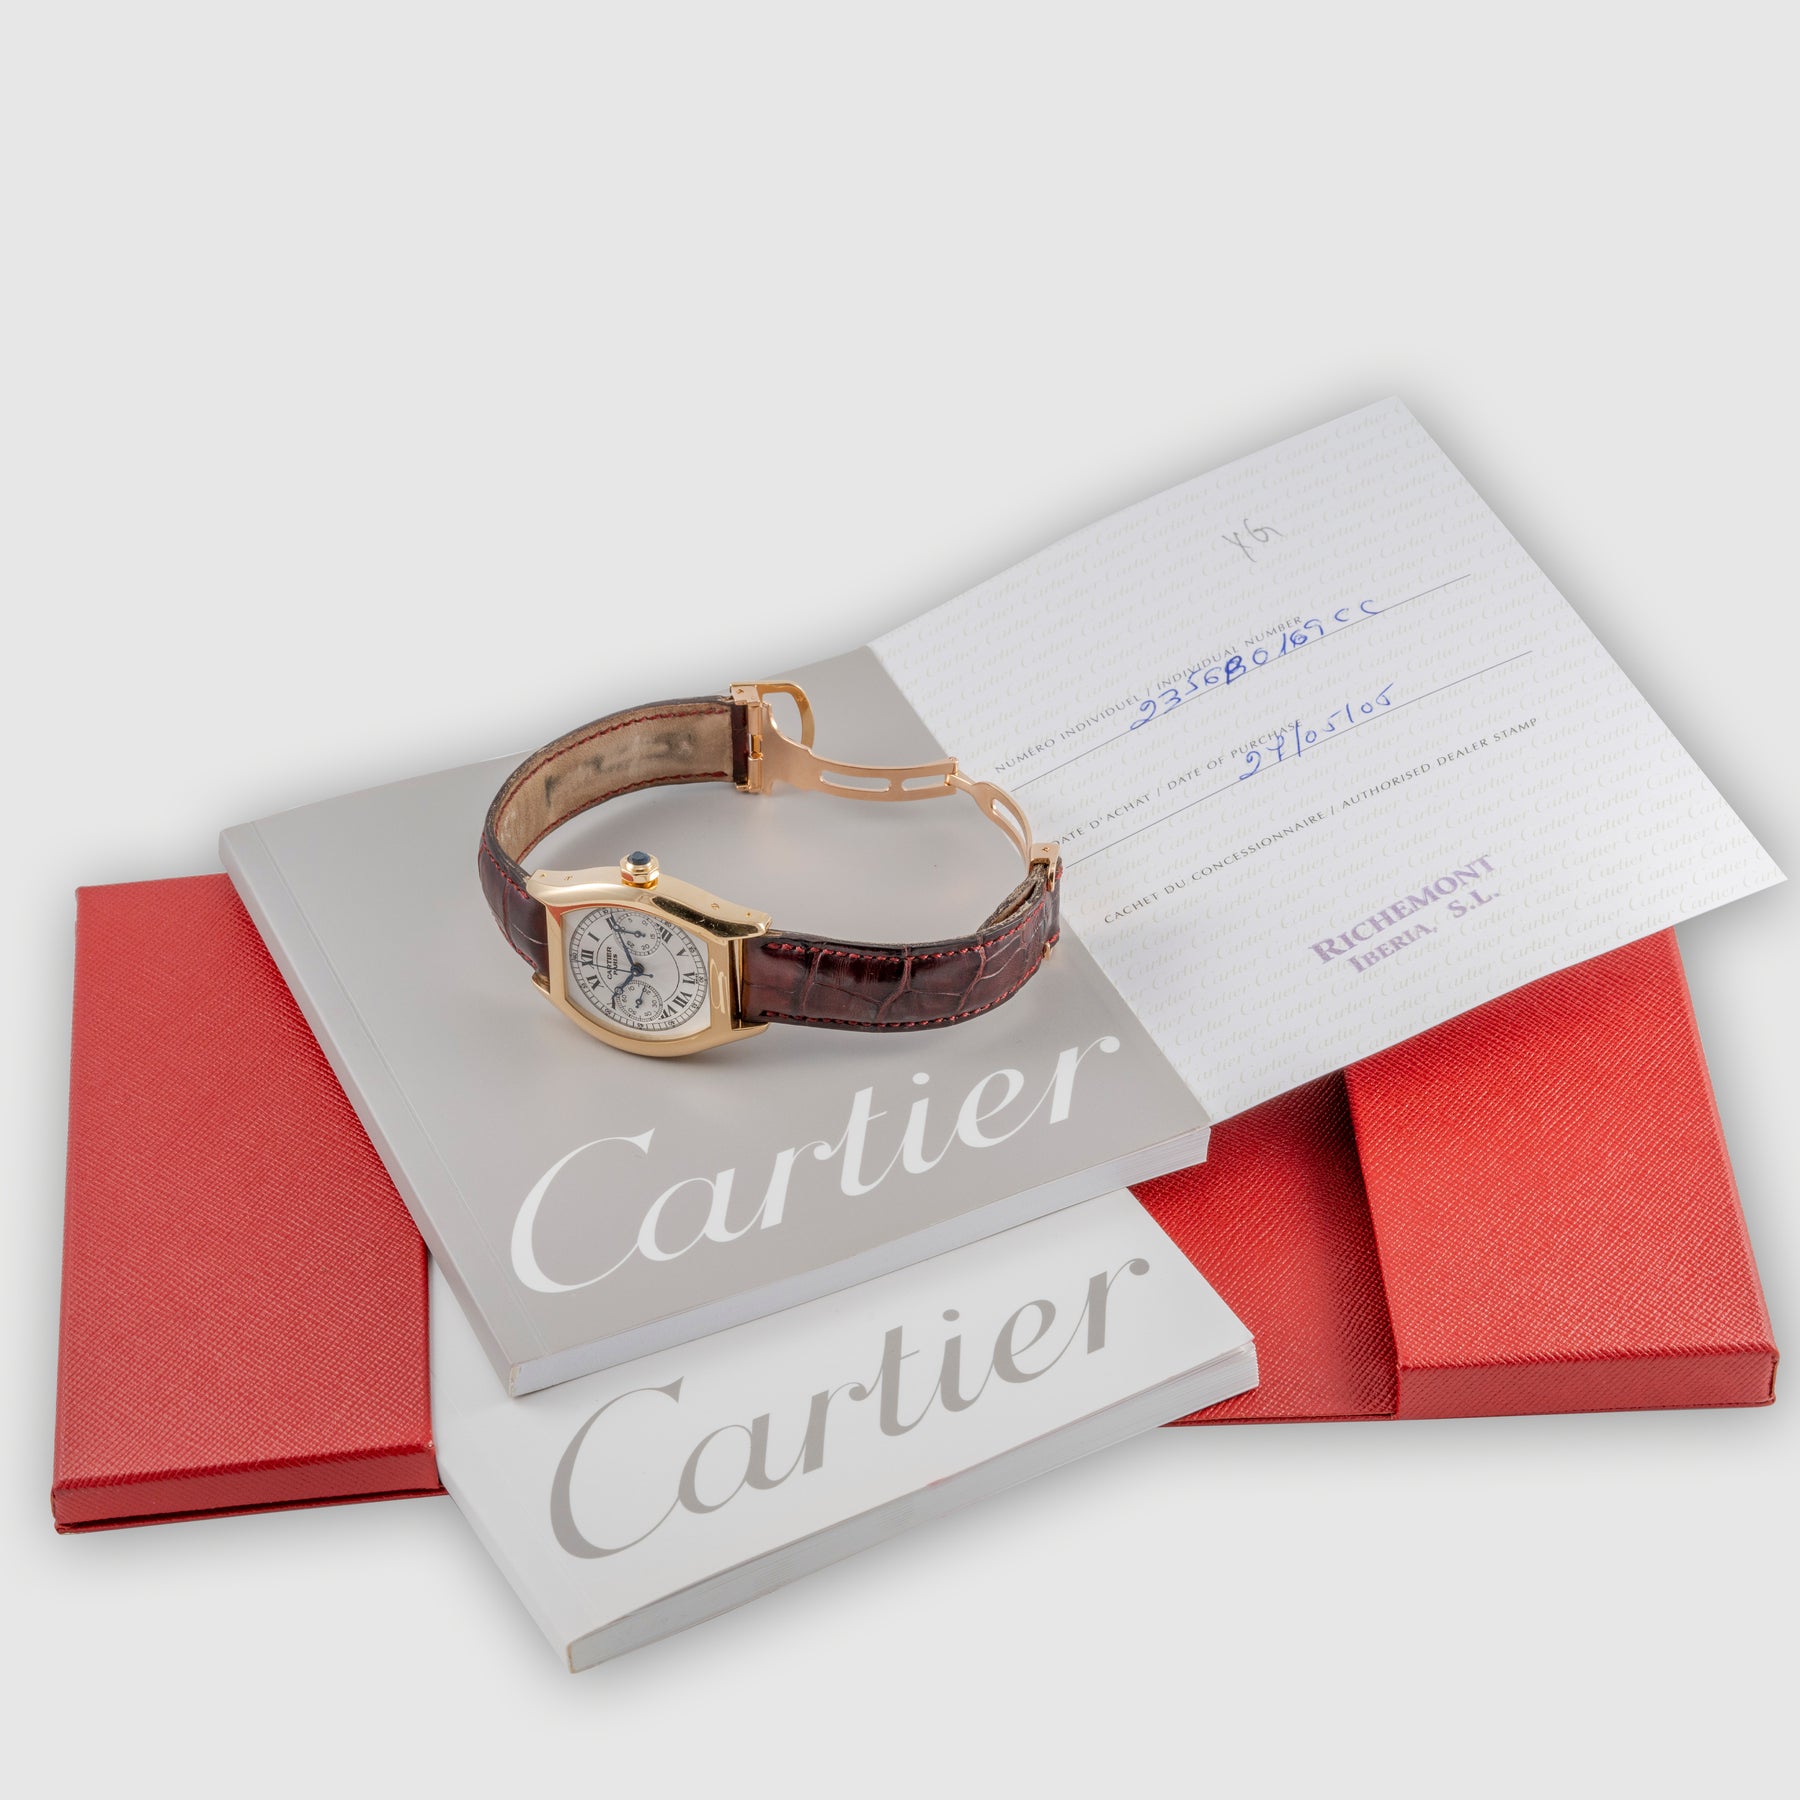 2005 Cartier Tortue CPCP Monopussoir YG Ref. 2356B (with Papers)